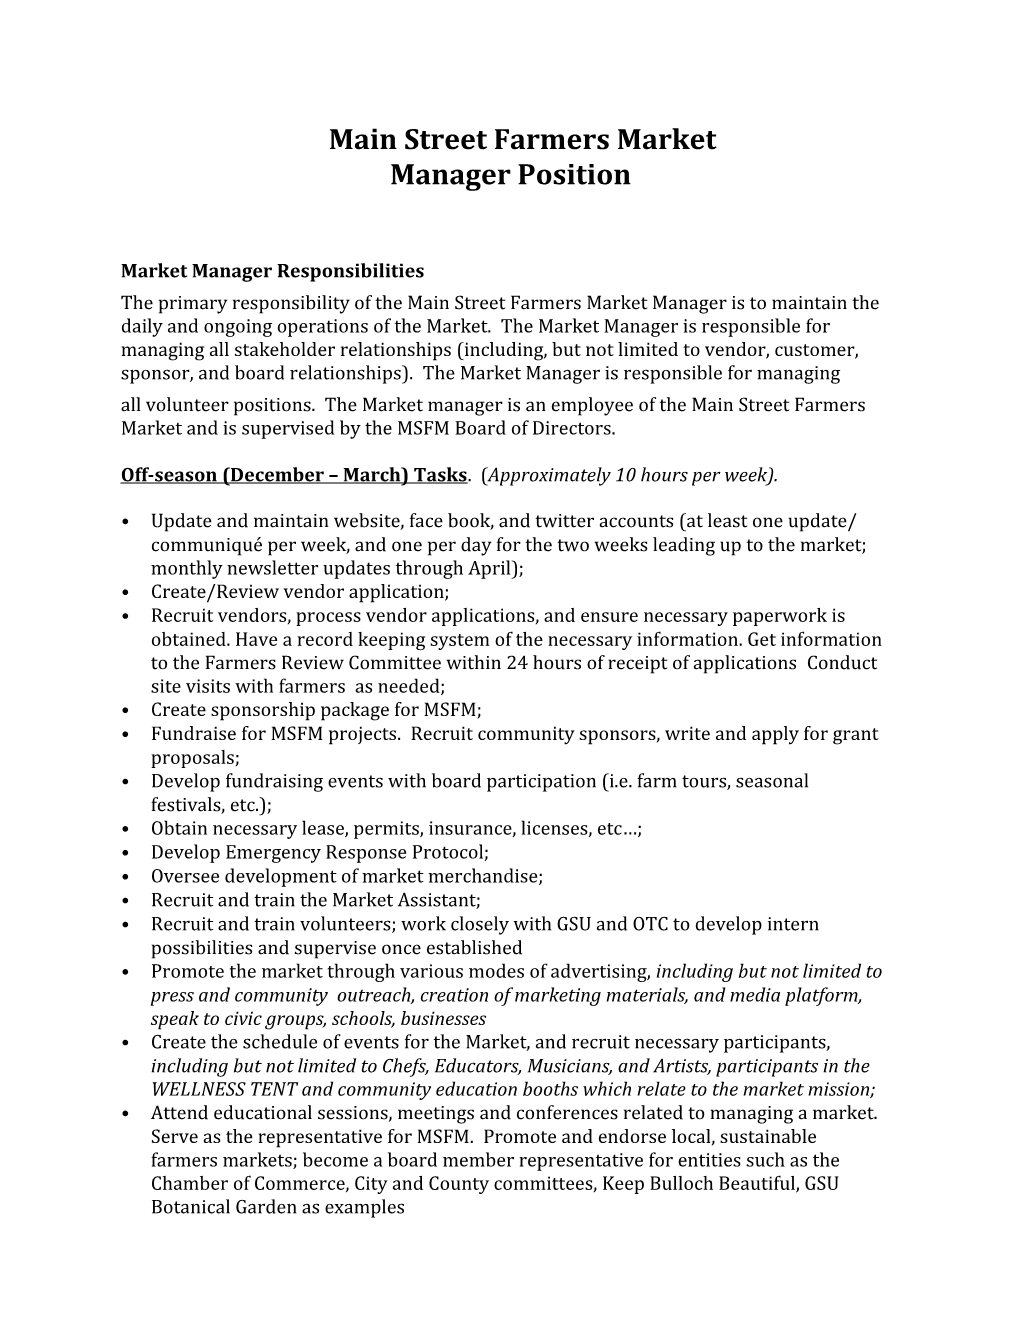 Market Manager Responsibilities